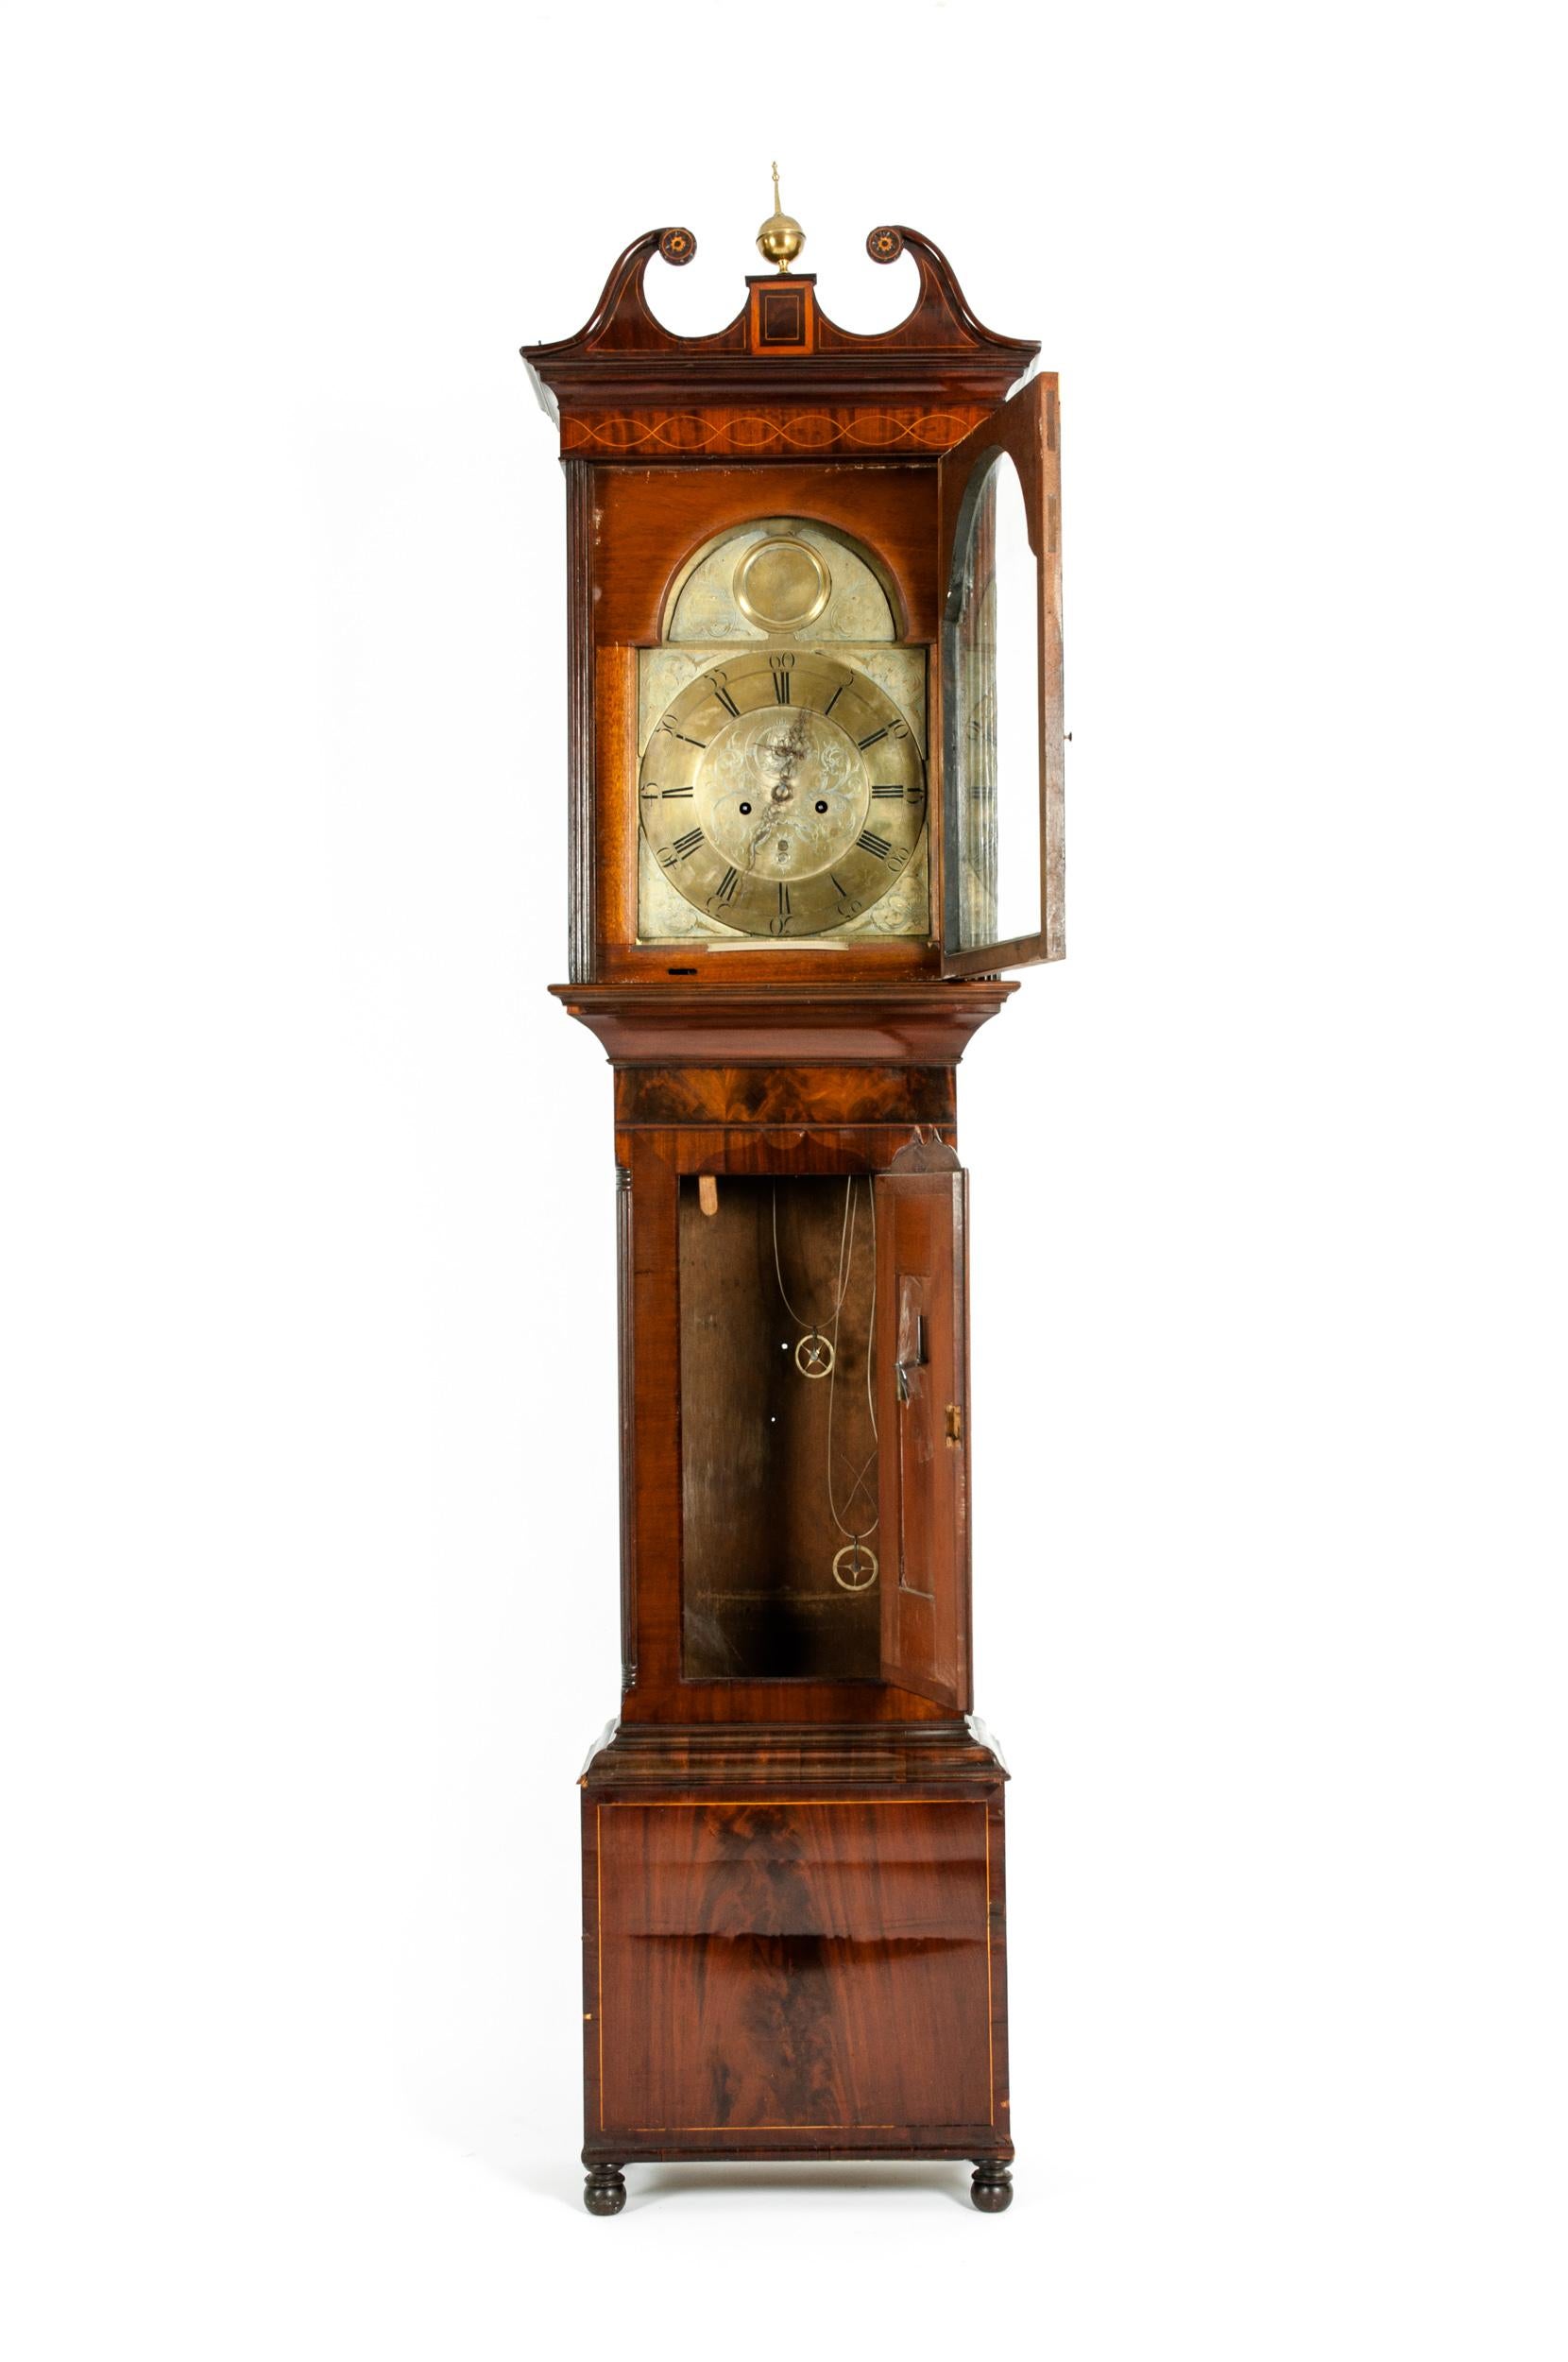 Mid-18th century J Kinnear inlay mahogany wood case long case clock with bronze mount details. The case clock is in good antique condition . Minor wear appropriate consistent with age / use. Top left finial have been repaired . The clock is signed